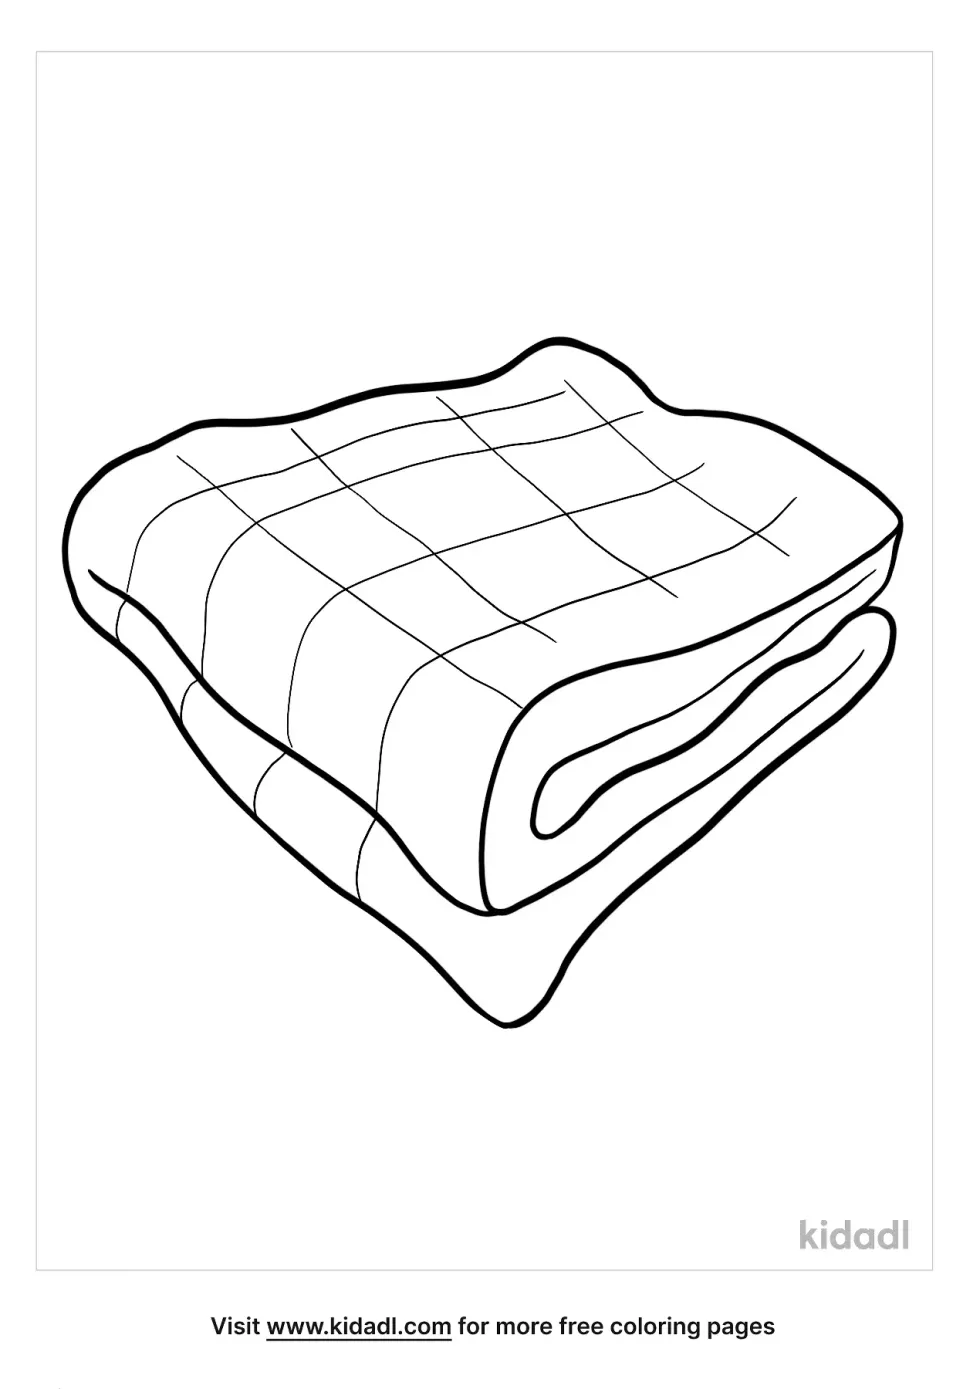 Blanket Coloring Page